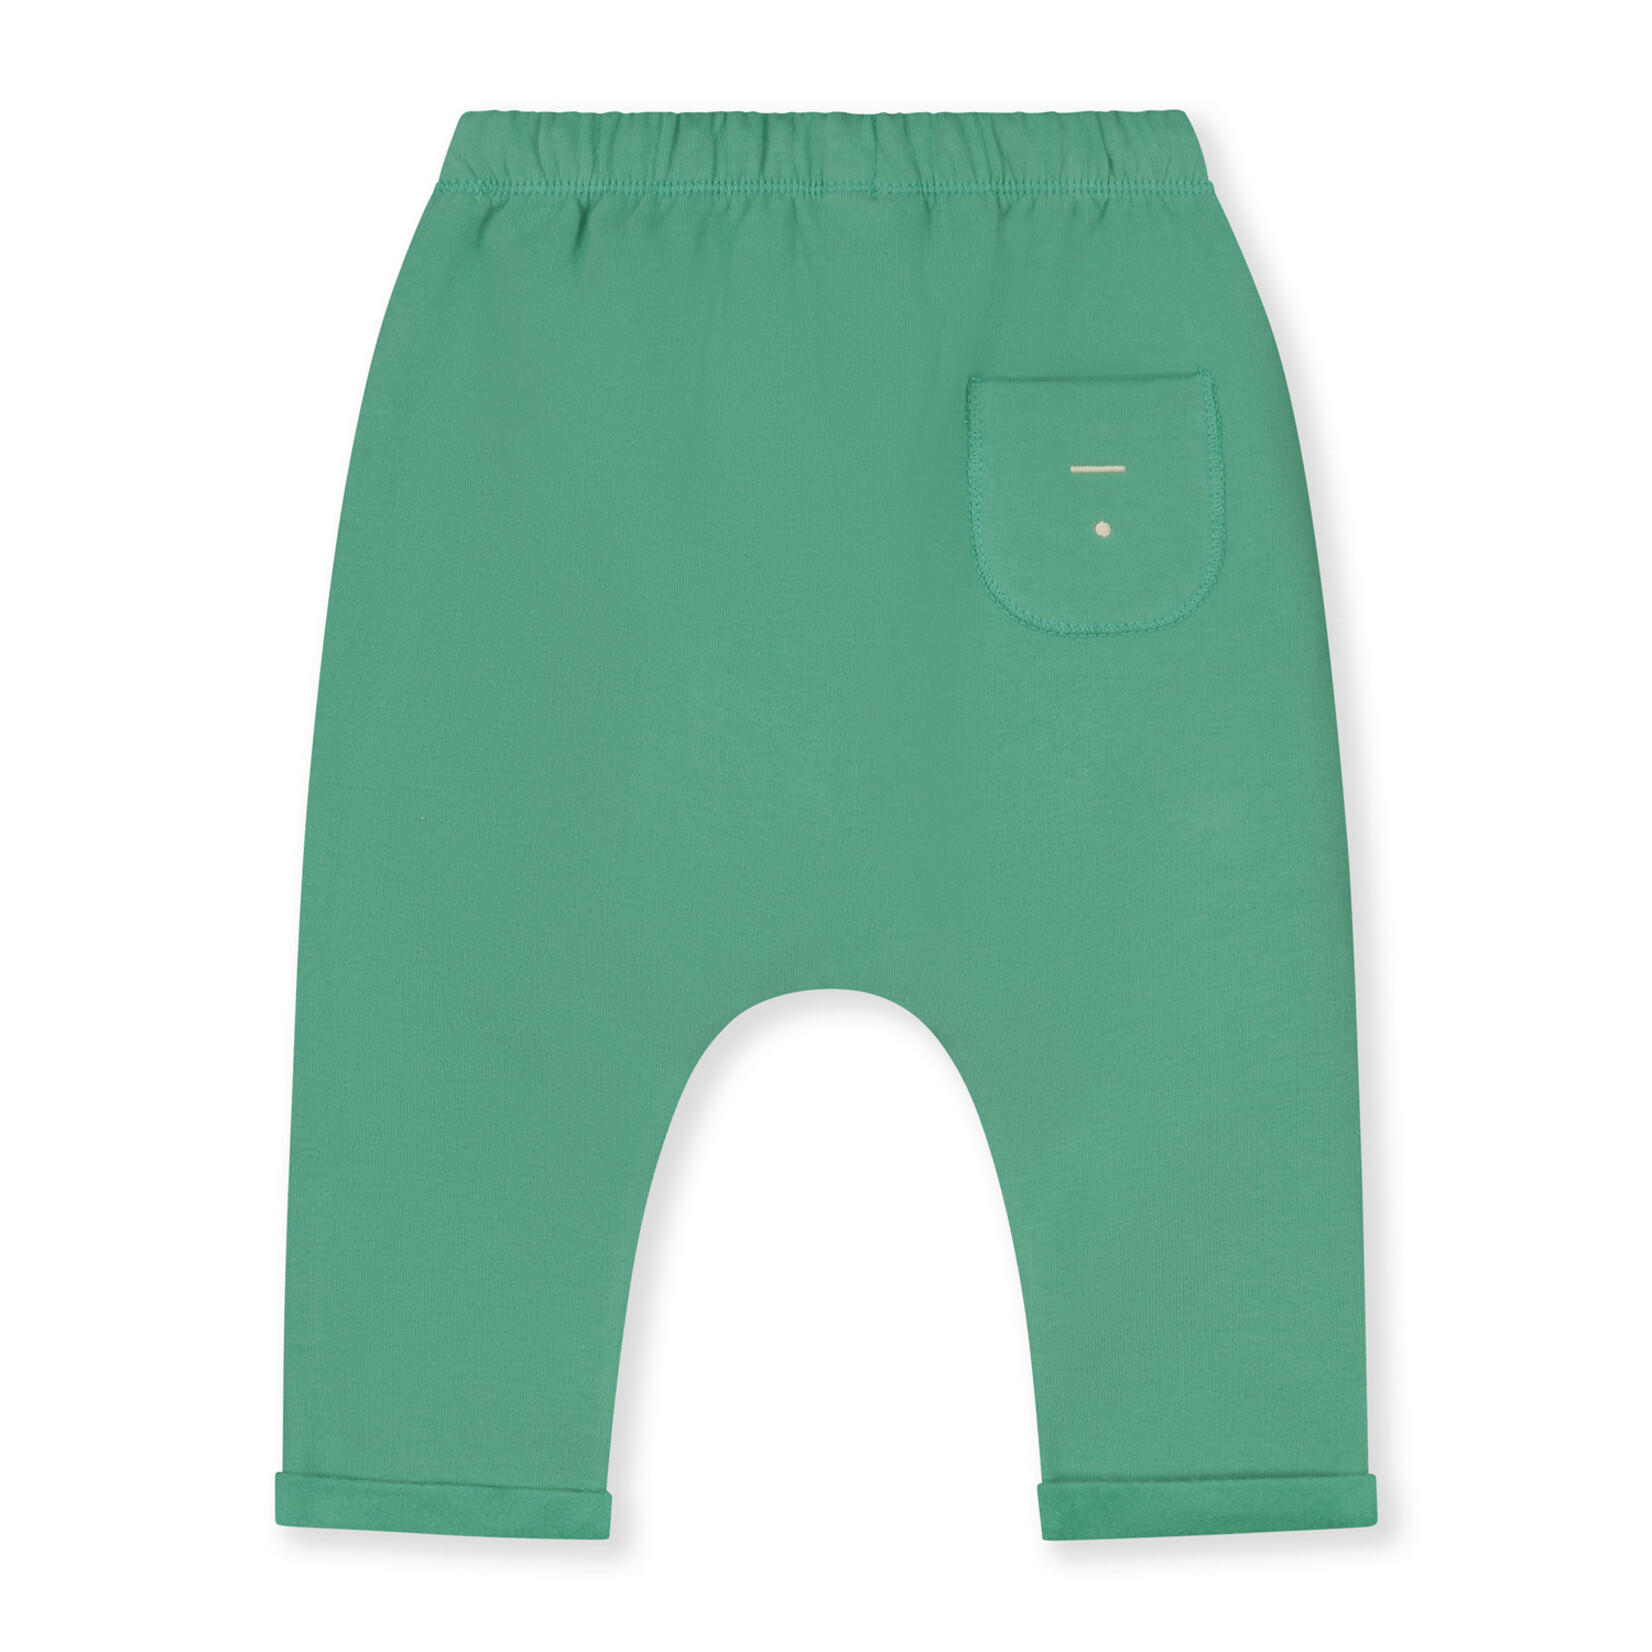 Gray Label Baby Pants GOTS - Bright Green